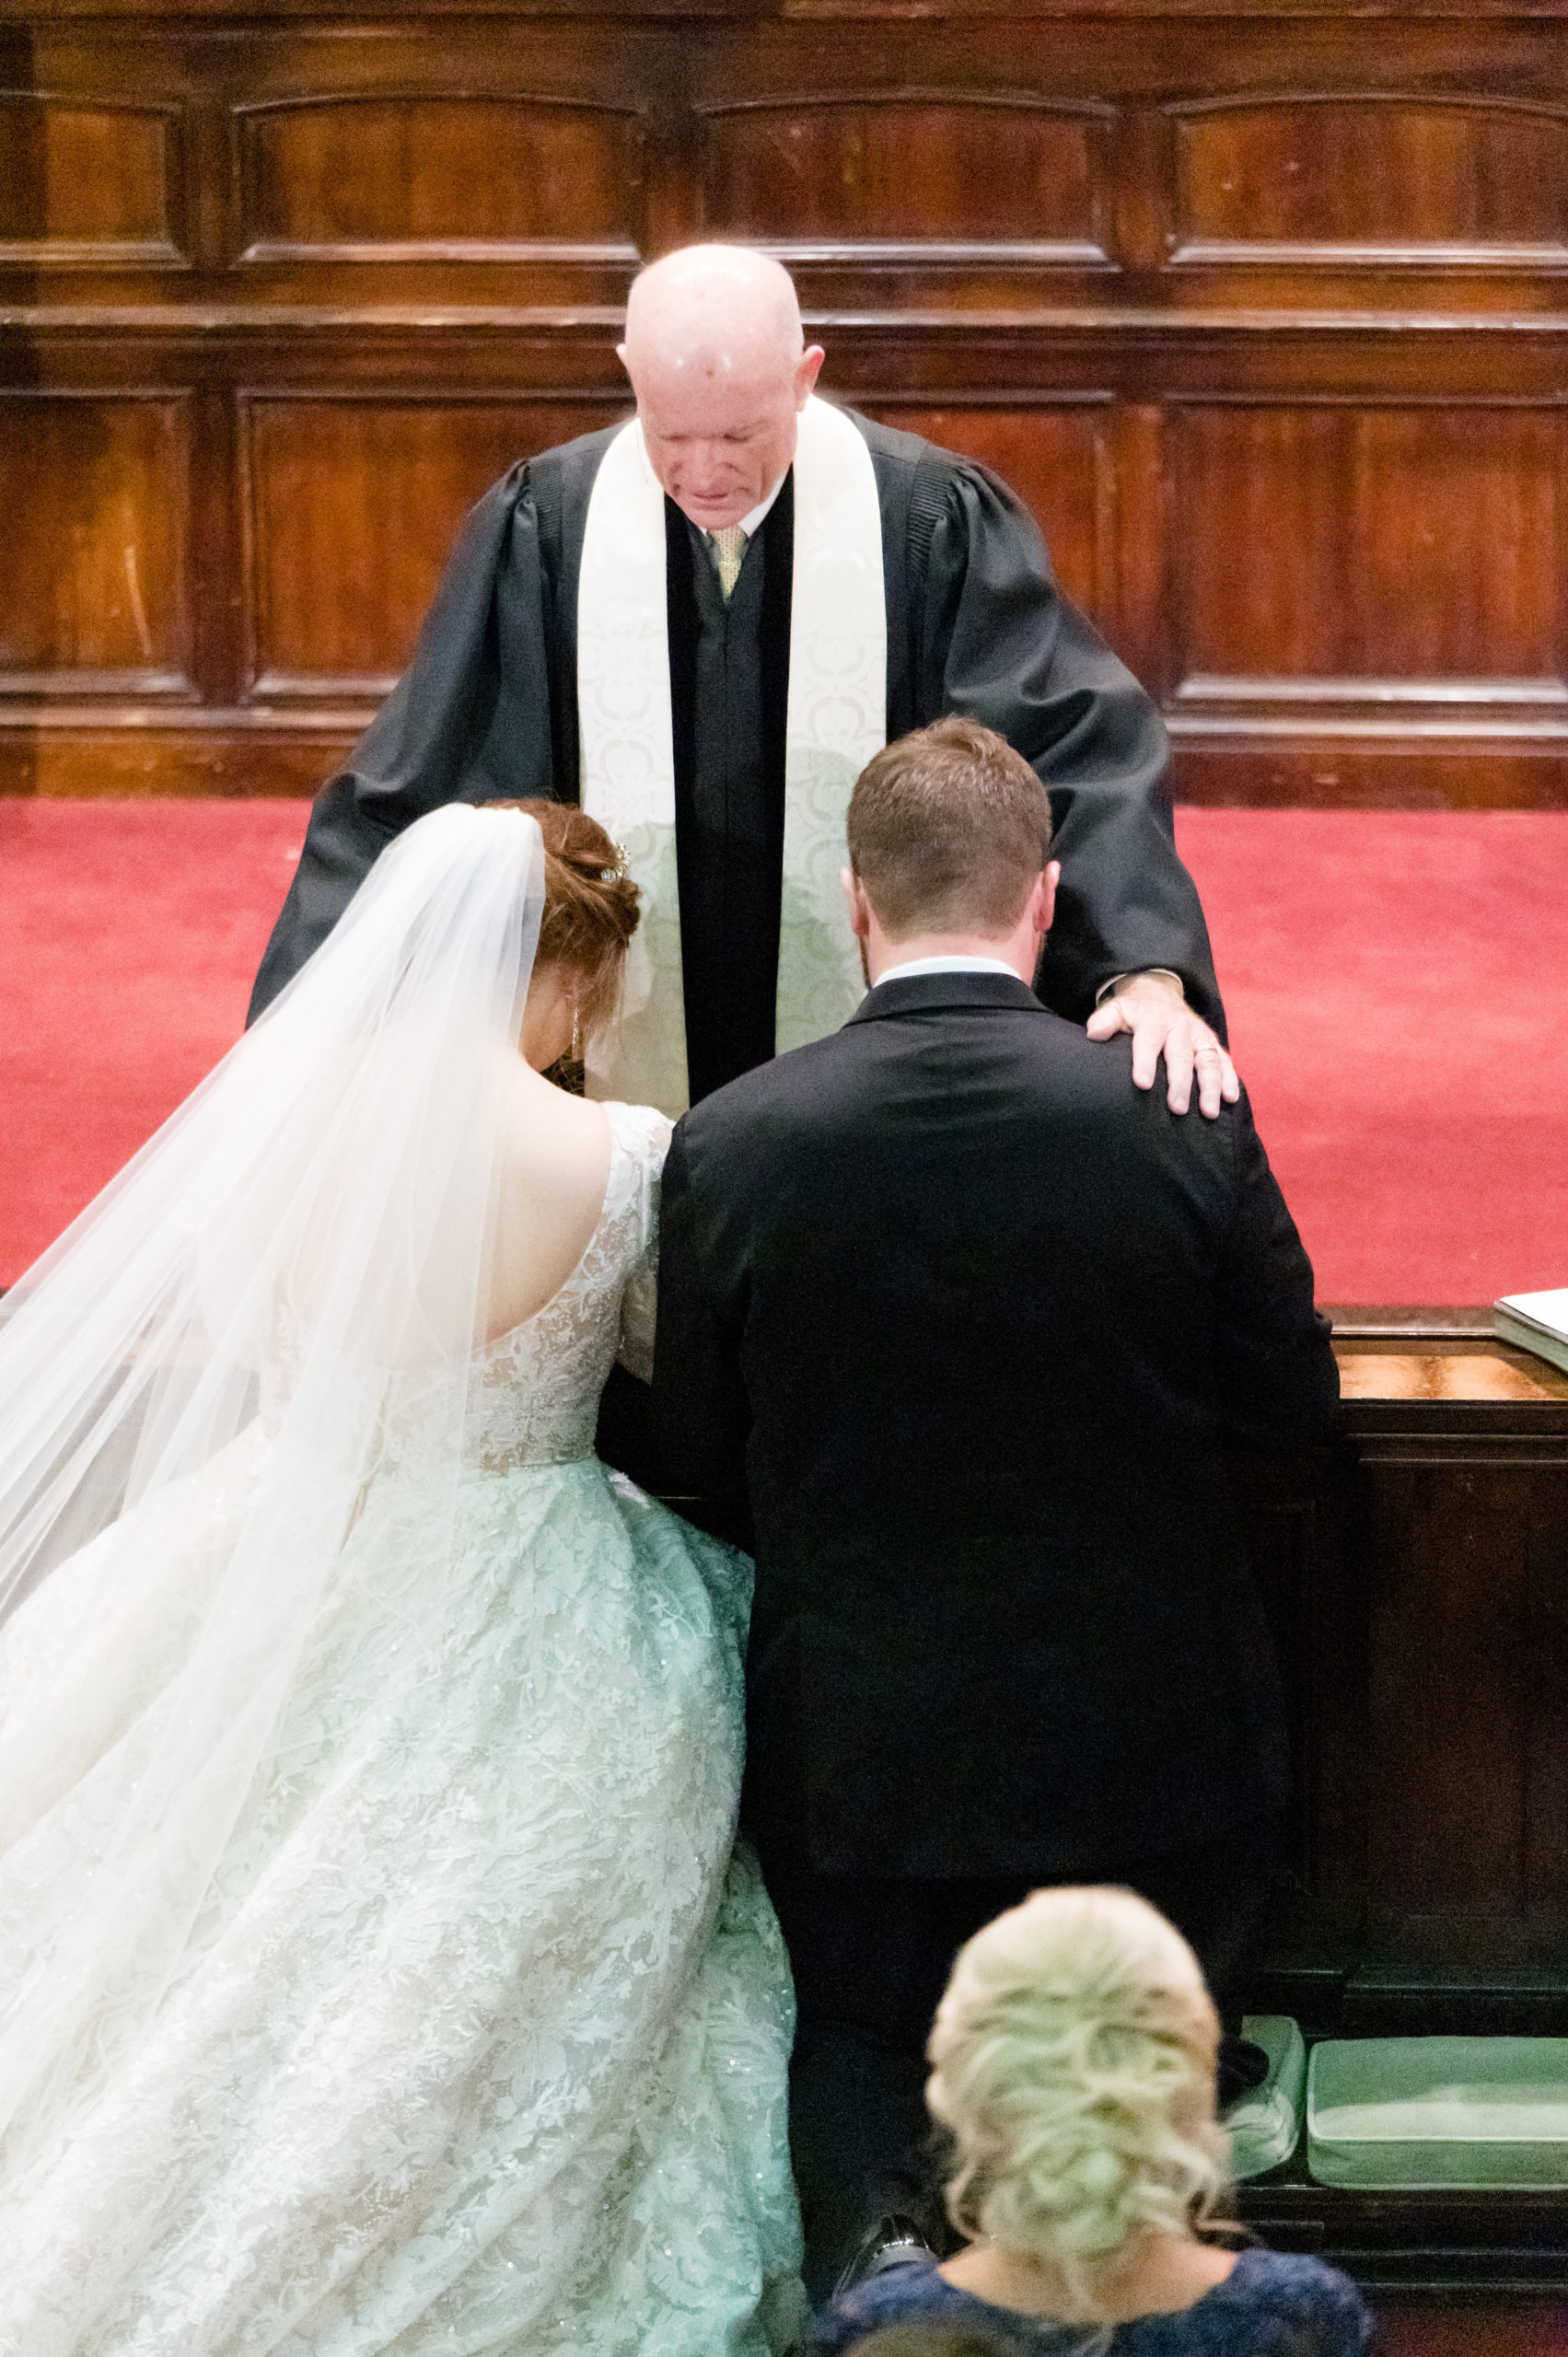 Minister prays over couple at ceremony.